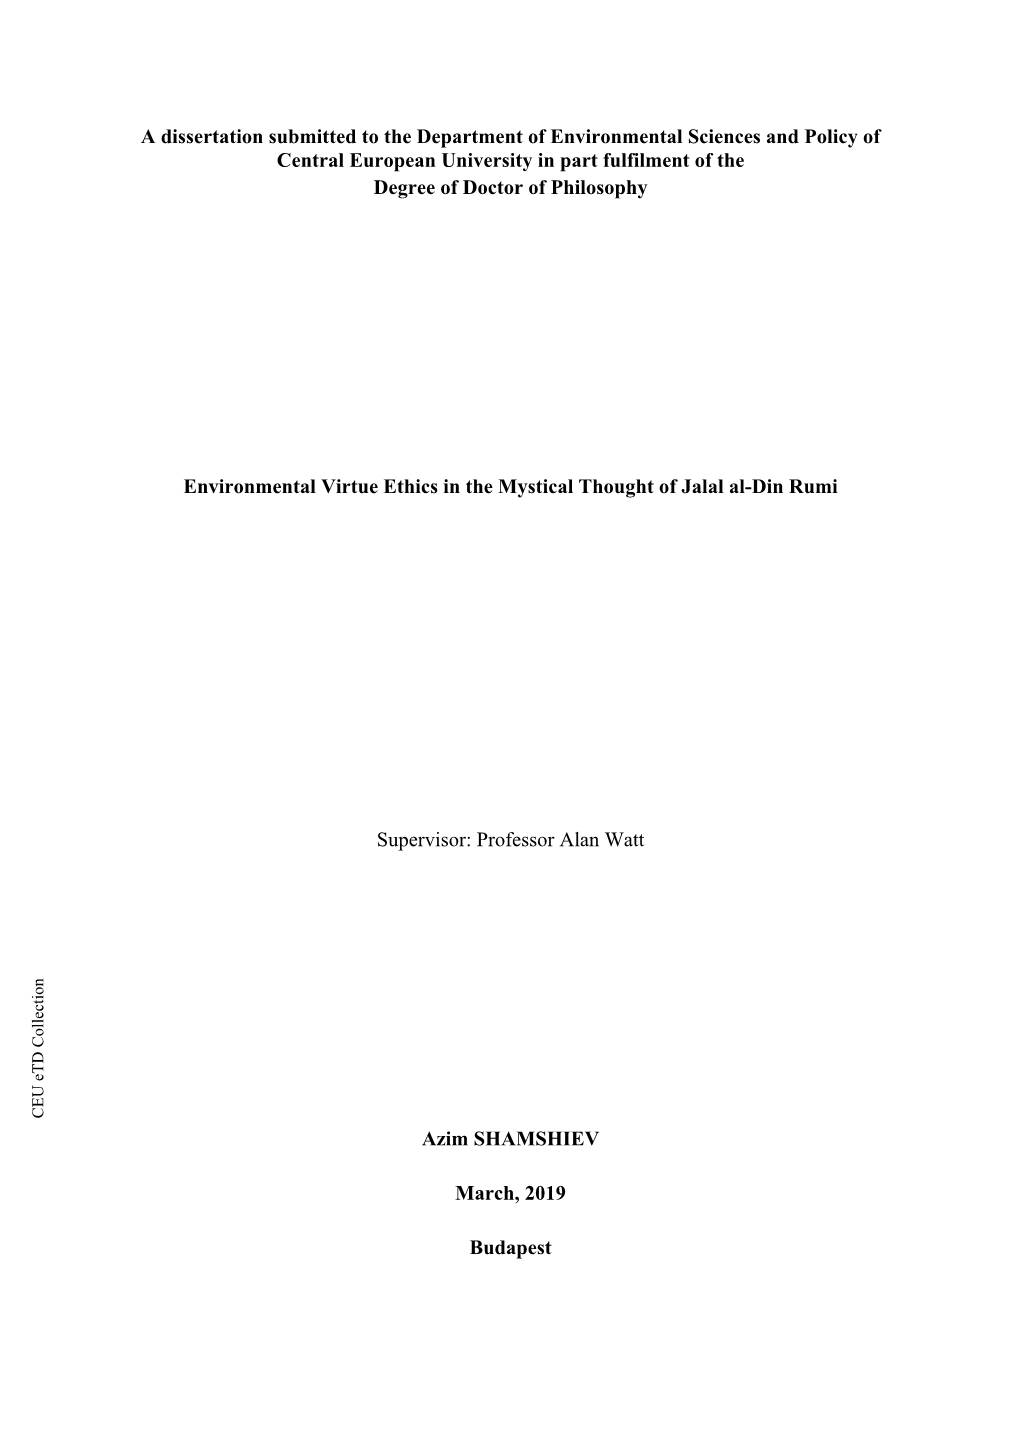 A Dissertation Submitted to the Department of Environmental Sciences and Policy of Central European University in Part Fulfilme